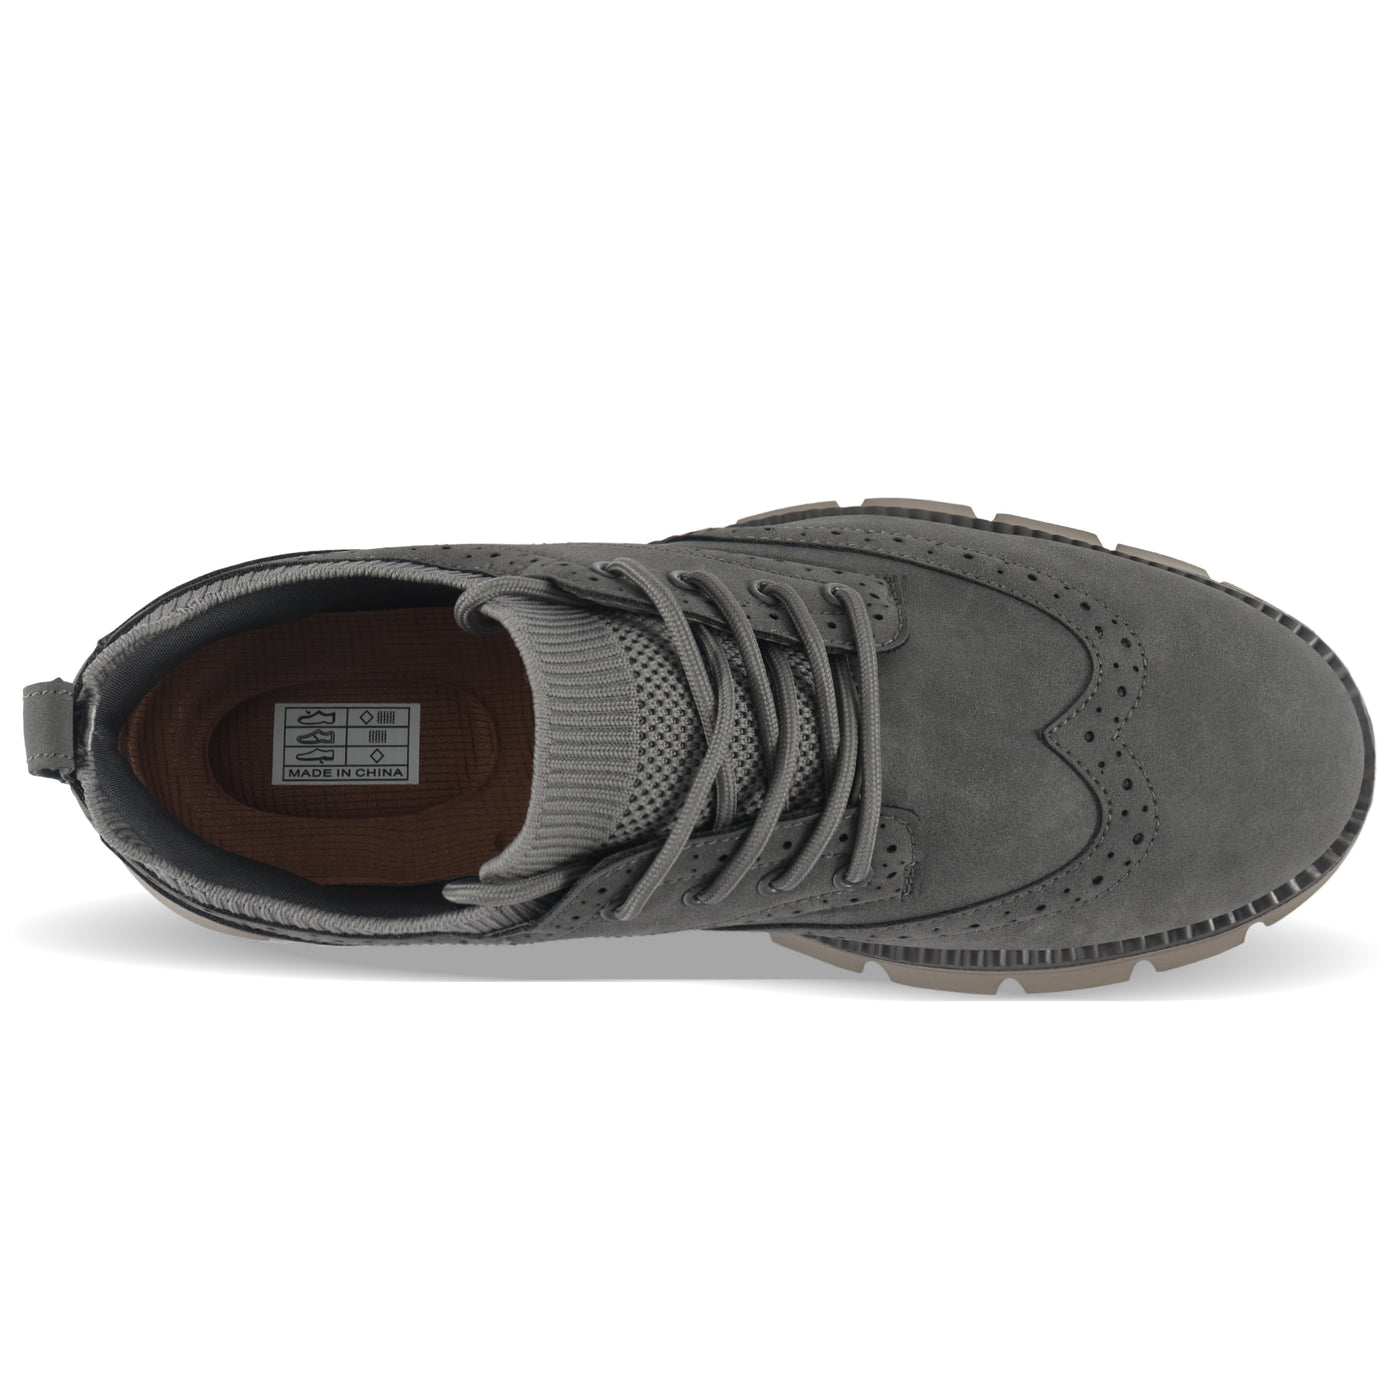 Just So So Men's Lace Up Oxford Shoes